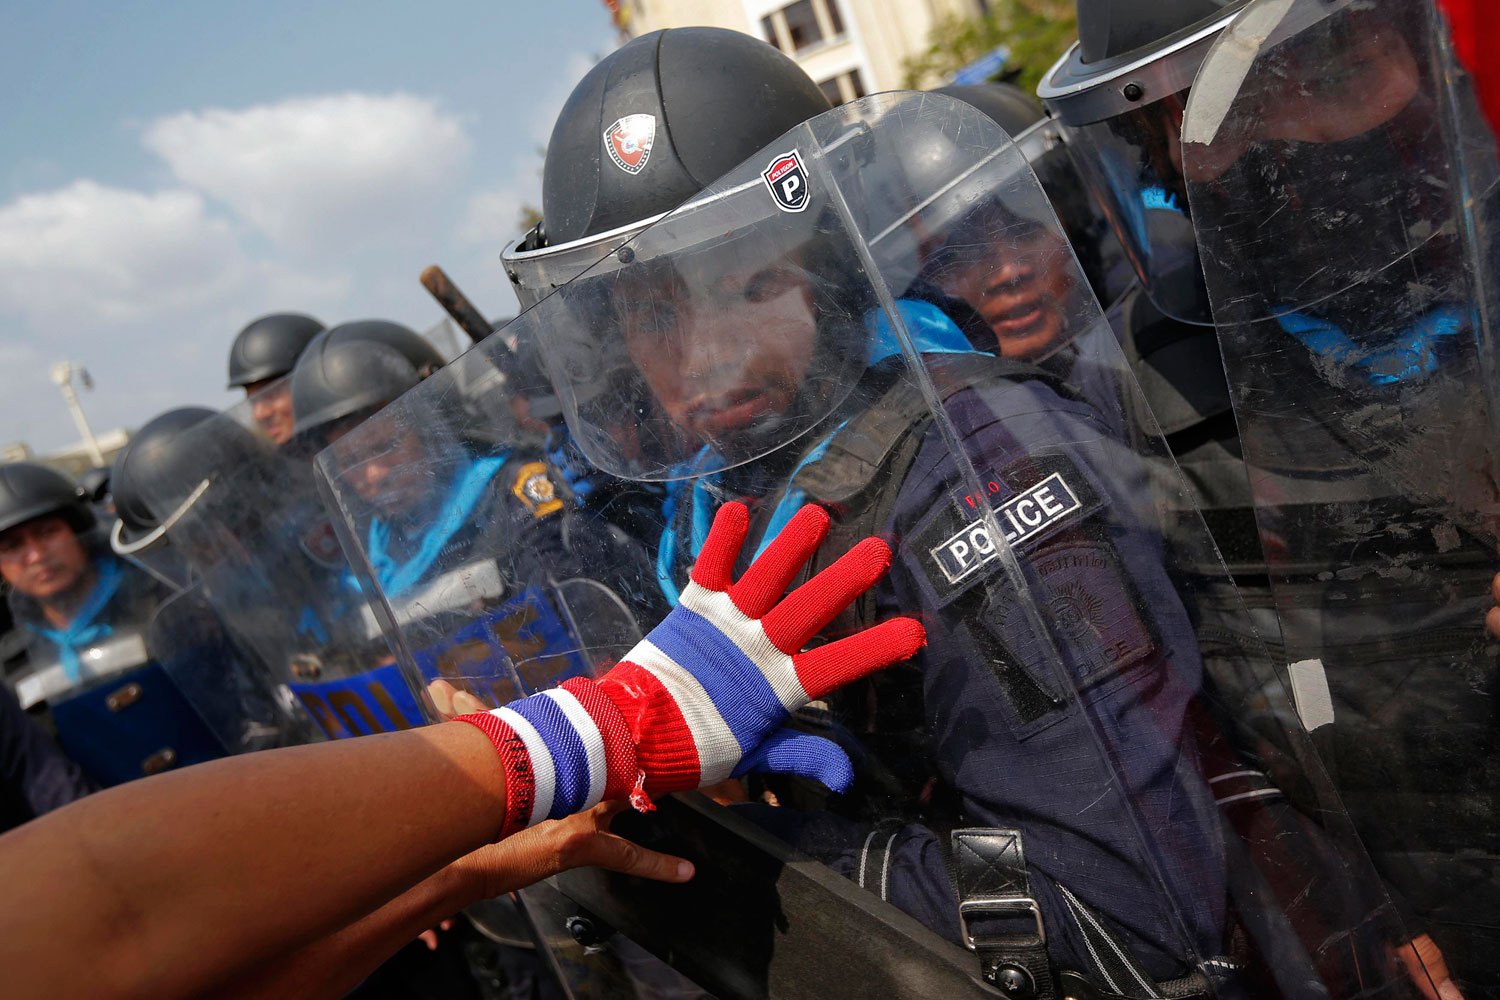 An anti-government protester pushes policemen during clashes near the Government House in Bangkok, on Feb. 18, 2014.